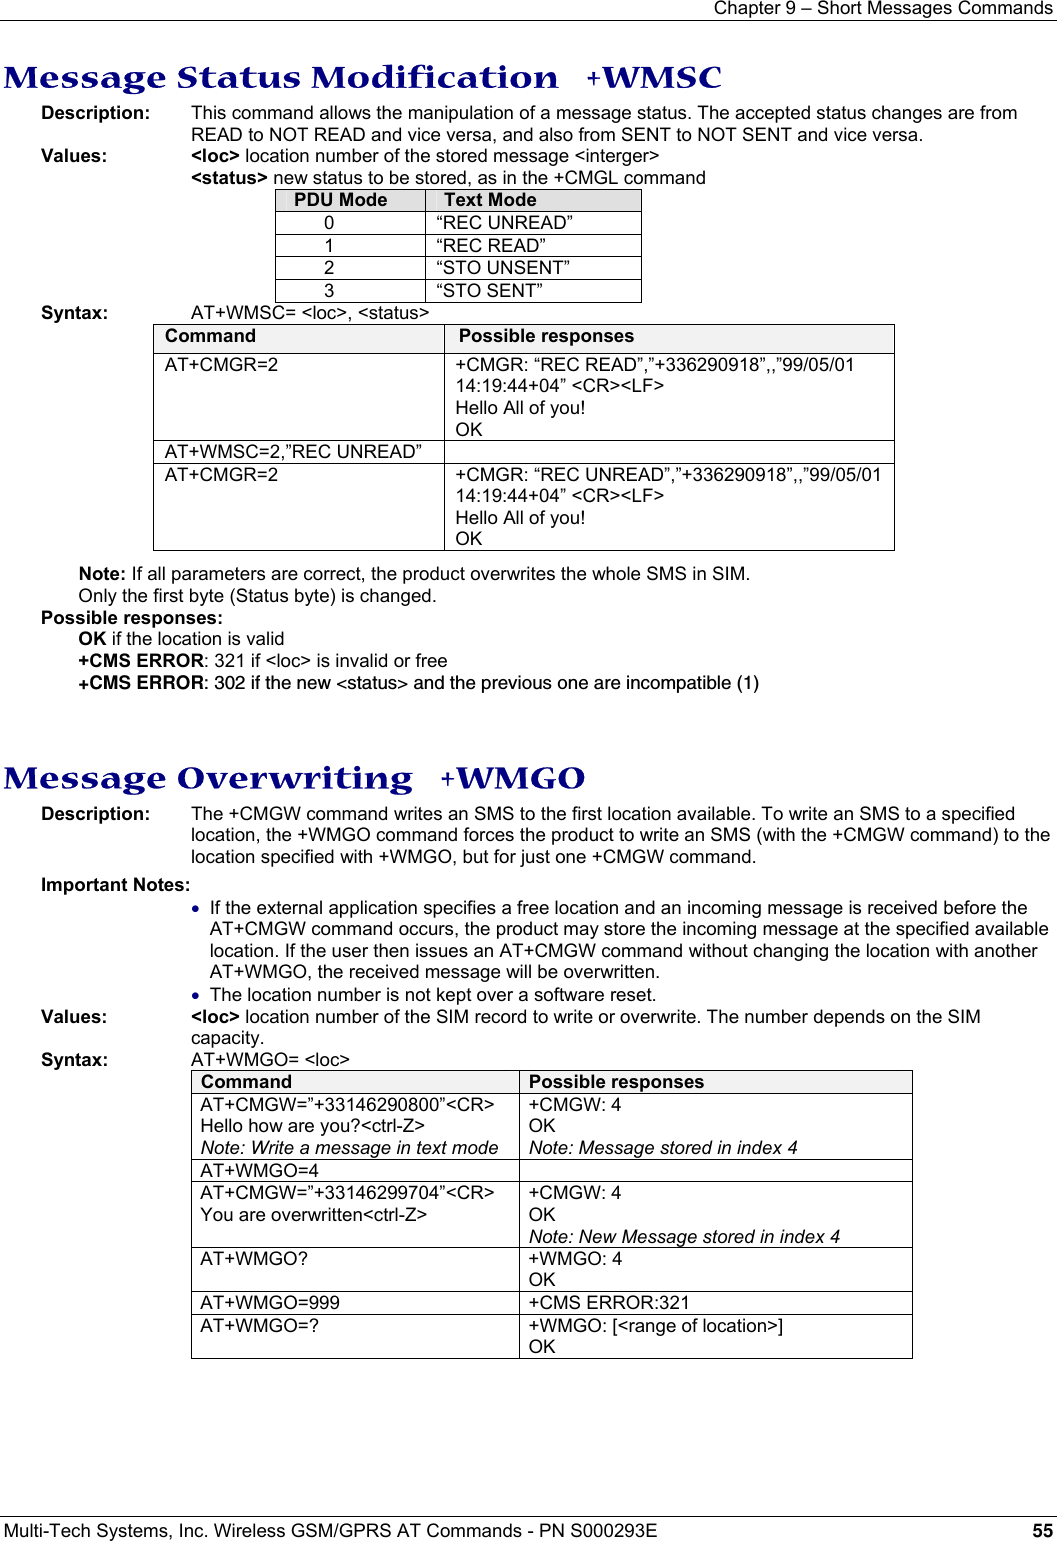 Chapter 9 – Short Messages Commands  Multi-Tech Systems, Inc. Wireless GSM/GPRS AT Commands - PN S000293E 55  Message Status Modification   +WMSC Description:   This command allows the manipulation of a message status. The accepted status changes are from READ to NOT READ and vice versa, and also from SENT to NOT SENT and vice versa. Values: &lt;loc&gt; location number of the stored message &lt;interger&gt;  &lt;status&gt; new status to be stored, as in the +CMGL command PDU Mode  Text Mode 0   “REC UNREAD” 1   “REC READ” 2   “STO UNSENT” 3 “STO SENT” Syntax:     AT+WMSC= &lt;loc&gt;, &lt;status&gt; Command  Possible responses AT+CMGR=2 +CMGR: “REC READ”,”+336290918”,,”99/05/01  14:19:44+04” &lt;CR&gt;&lt;LF&gt; Hello All of you! OK AT+WMSC=2,”REC UNREAD”   AT+CMGR=2  +CMGR: “REC UNREAD”,”+336290918”,,”99/05/01  14:19:44+04” &lt;CR&gt;&lt;LF&gt; Hello All of you! OK Note: If all parameters are correct, the product overwrites the whole SMS in SIM.  Only the first byte (Status byte) is changed. Possible responses: OK if the location is valid +CMS ERROR: 321 if &lt;loc&gt; is invalid or free +CMS ERROR: 302 if the new &lt;status&gt; and the previous one are incompatible (1)   Message Overwriting   +WMGO Description:  The +CMGW command writes an SMS to the first location available. To write an SMS to a specified location, the +WMGO command forces the product to write an SMS (with the +CMGW command) to the location specified with +WMGO, but for just one +CMGW command.    Important Notes: • If the external application specifies a free location and an incoming message is received before the AT+CMGW command occurs, the product may store the incoming message at the specified available location. If the user then issues an AT+CMGW command without changing the location with another AT+WMGO, the received message will be overwritten. • The location number is not kept over a software reset. Values:    &lt;loc&gt; location number of the SIM record to write or overwrite. The number depends on the SIM capacity.  Syntax:    AT+WMGO= &lt;loc&gt; Command  Possible responses AT+CMGW=”+33146290800”&lt;CR&gt; Hello how are you?&lt;ctrl-Z&gt; Note: Write a message in text mode +CMGW: 4 OK Note: Message stored in index 4 AT+WMGO=4   AT+CMGW=”+33146299704”&lt;CR&gt; You are overwritten&lt;ctrl-Z&gt;  +CMGW: 4  OK Note: New Message stored in index 4 AT+WMGO? +WMGO: 4 OK AT+WMGO=999 +CMS ERROR:321 AT+WMGO=?  +WMGO: [&lt;range of location&gt;] OK   